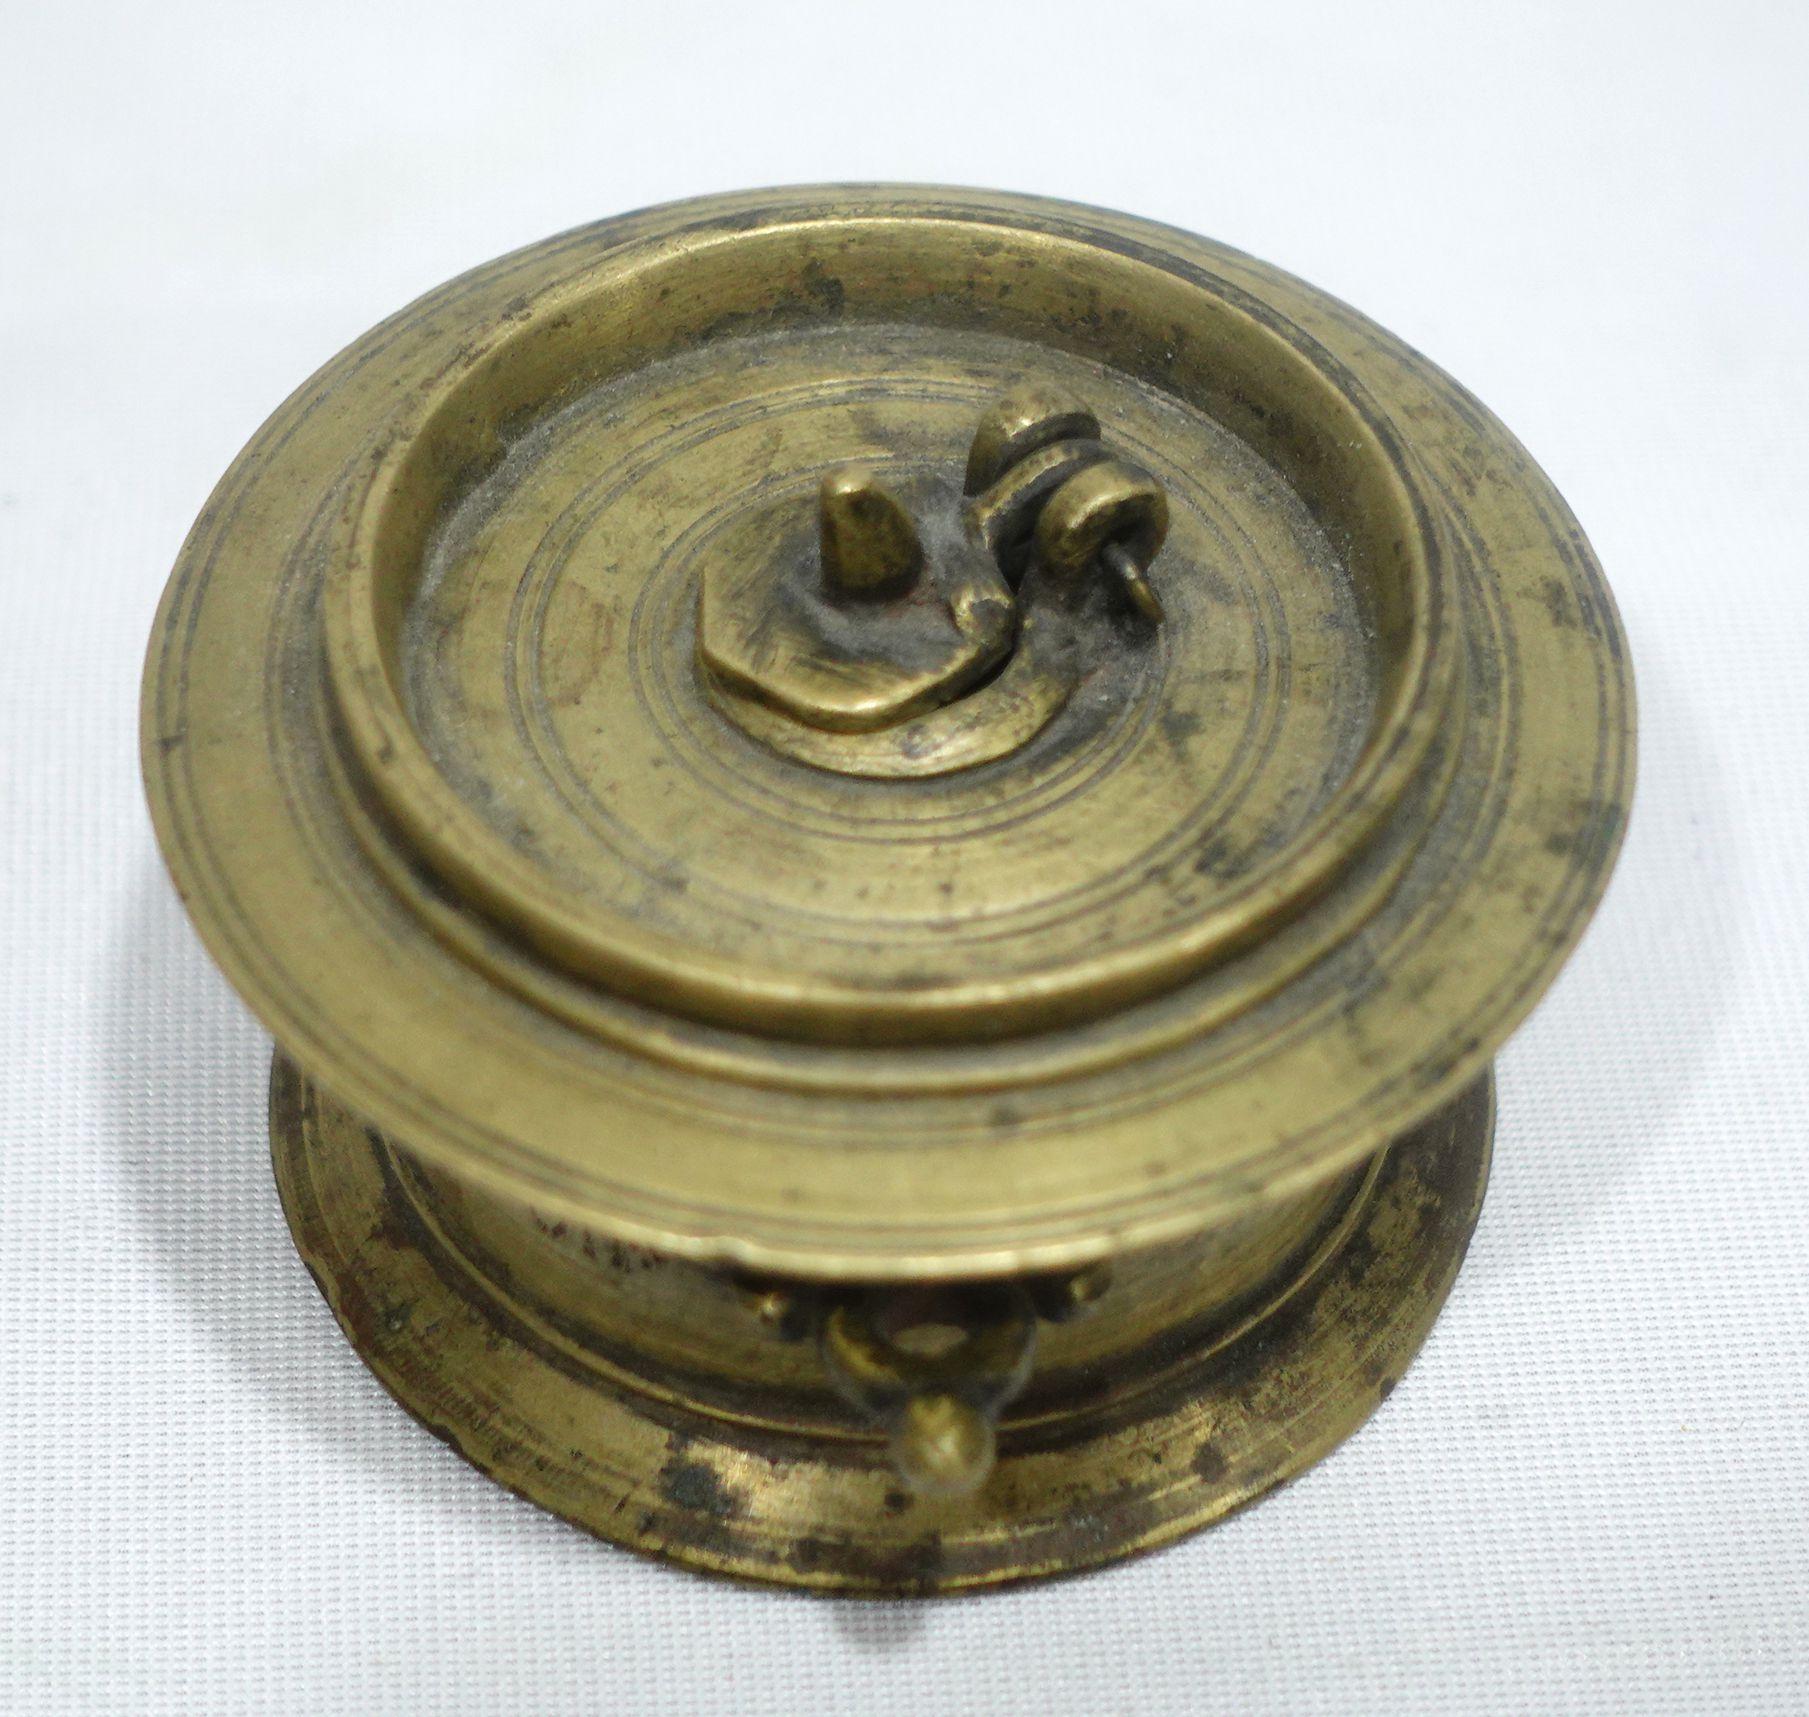 Antique Heavy Brass Ink Pot with Sign on the Body. RI#01.
It's a very old piece from the 18th century.
